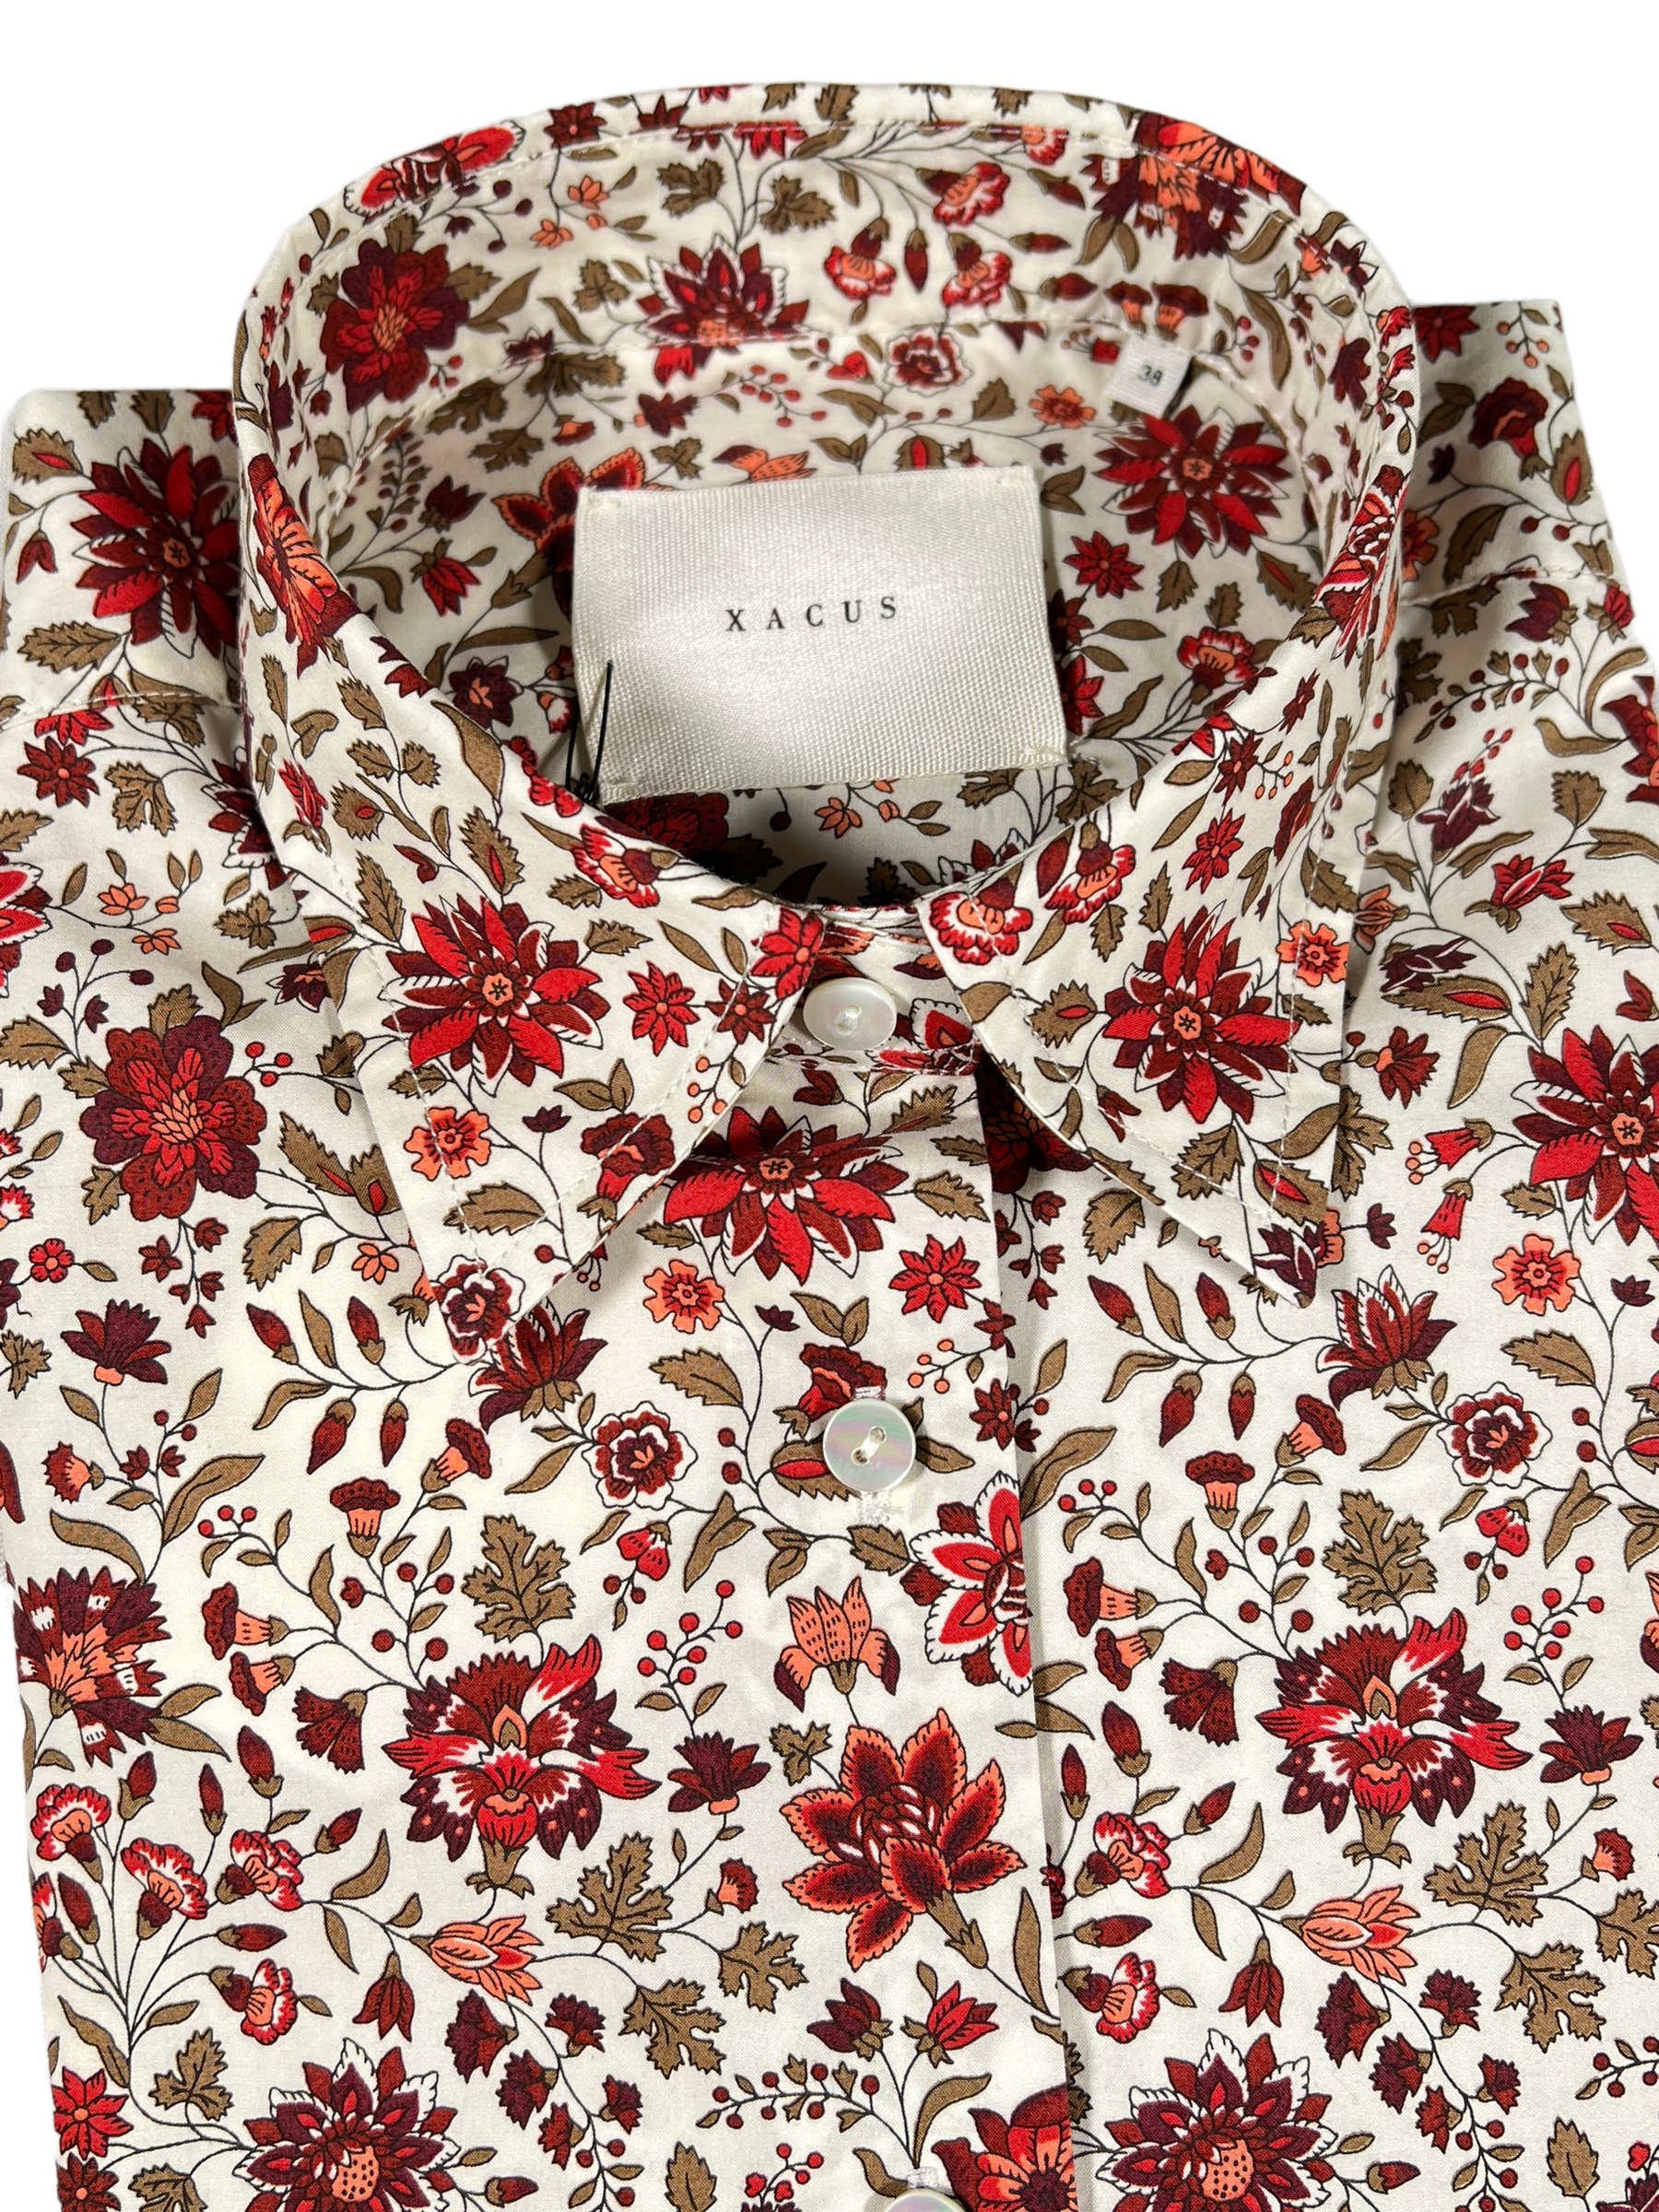 XACUS FLORAL BLOUSE - RED/WHITE